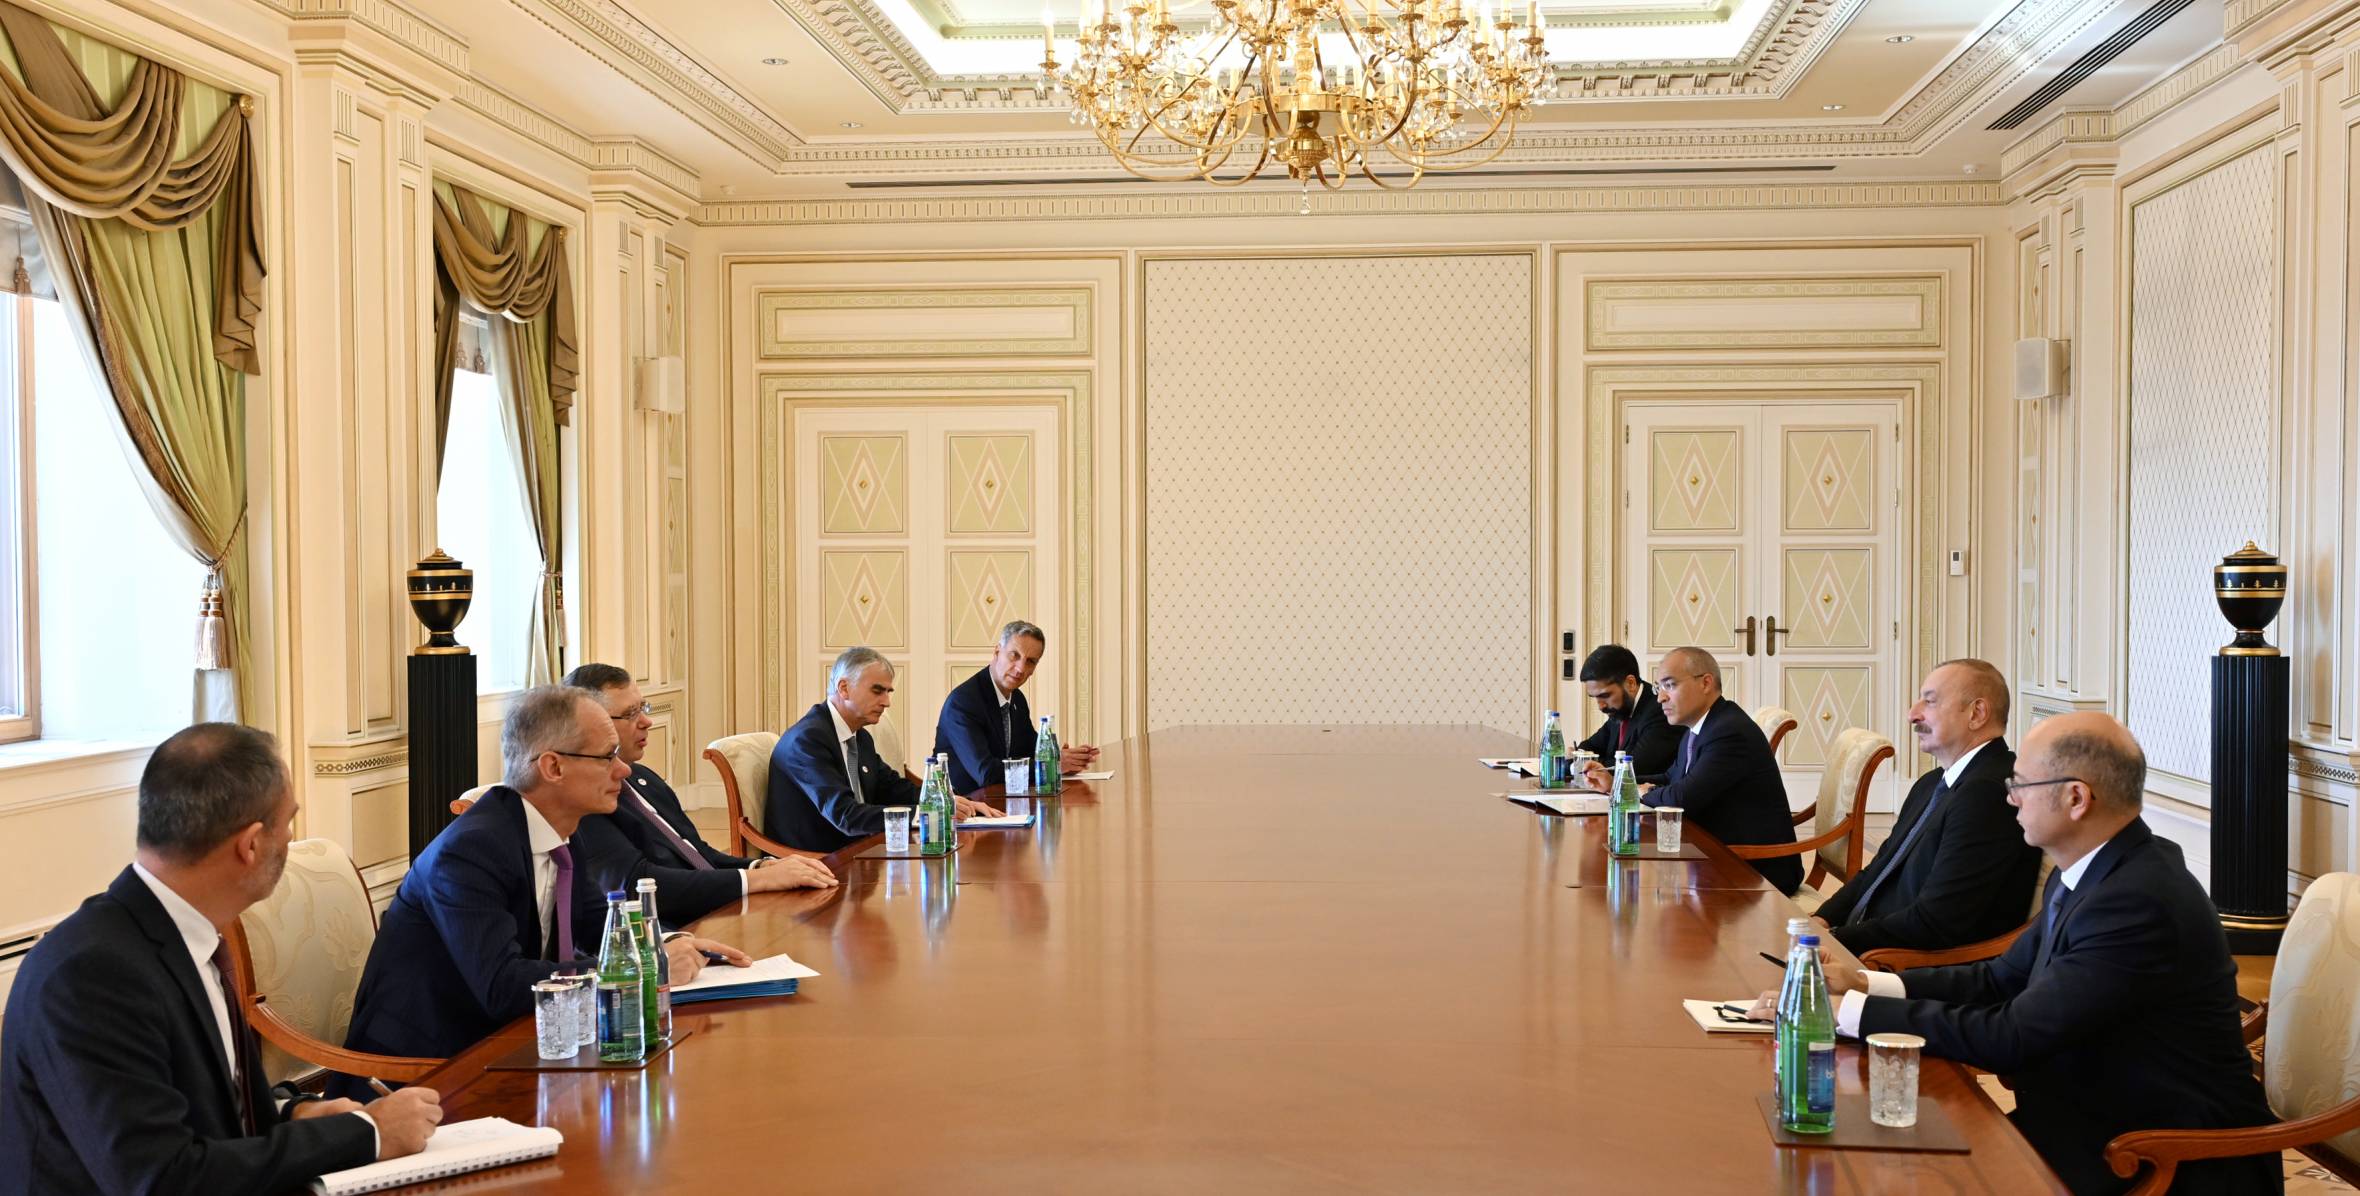 Ilham Aliyev received Chief Executive Officer of TotalEnergies